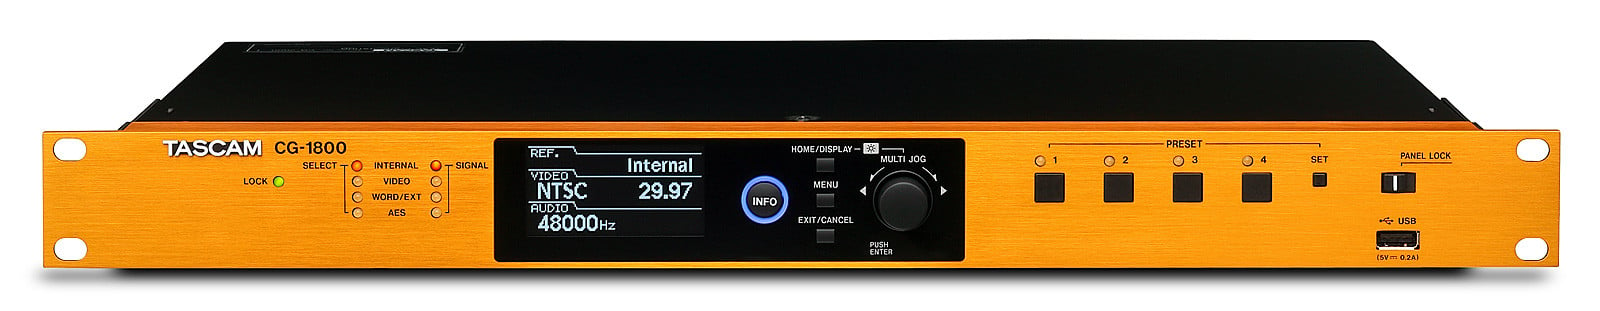 Tascam CG-1800-front